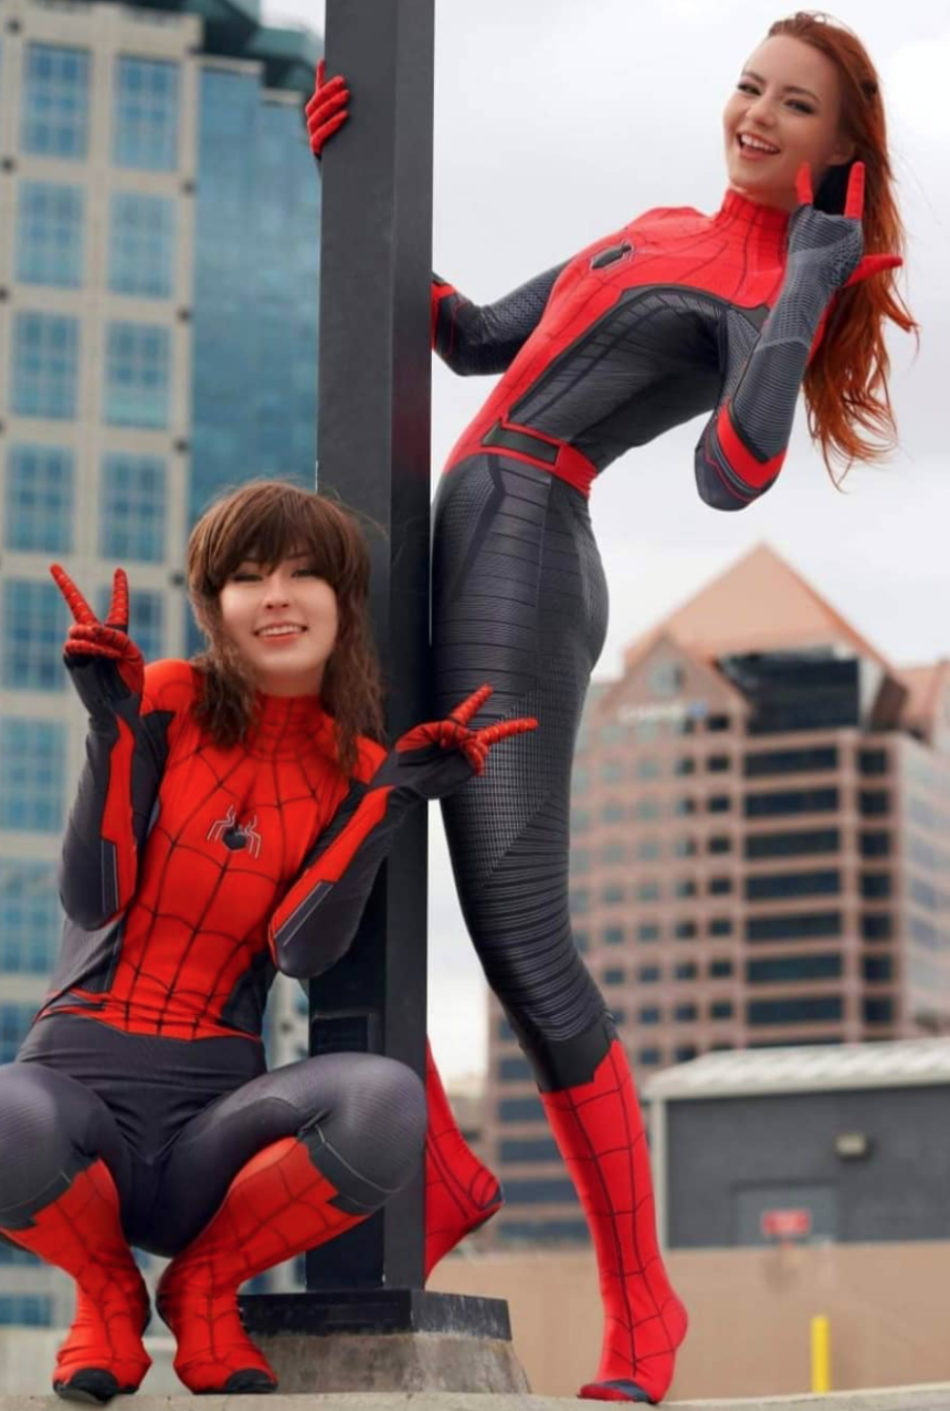 Sexy Red Hot Cosplay Girls Spiderman Women Best Photo Compilation 2021 (89 HQ Photos) 159